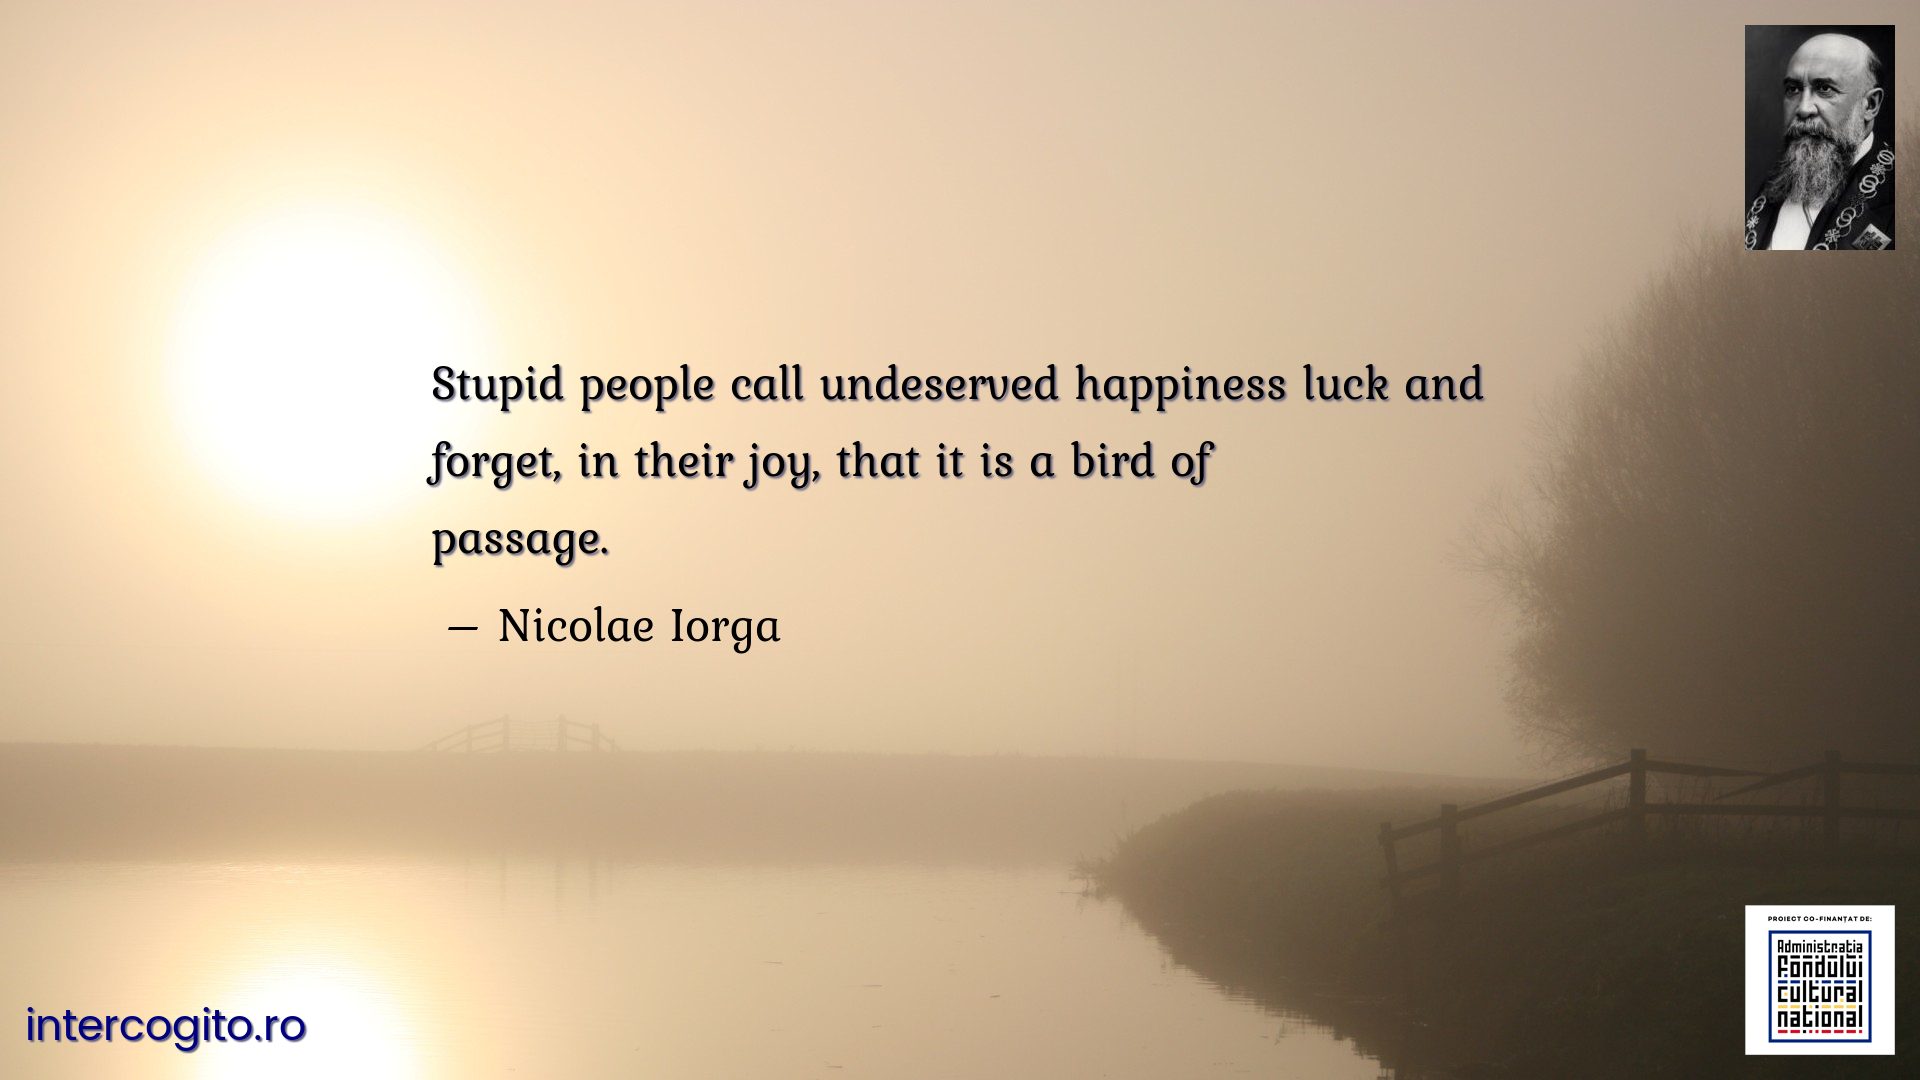 Stupid people call undeserved happiness luck and forget, in their joy, that it is a bird of passage.